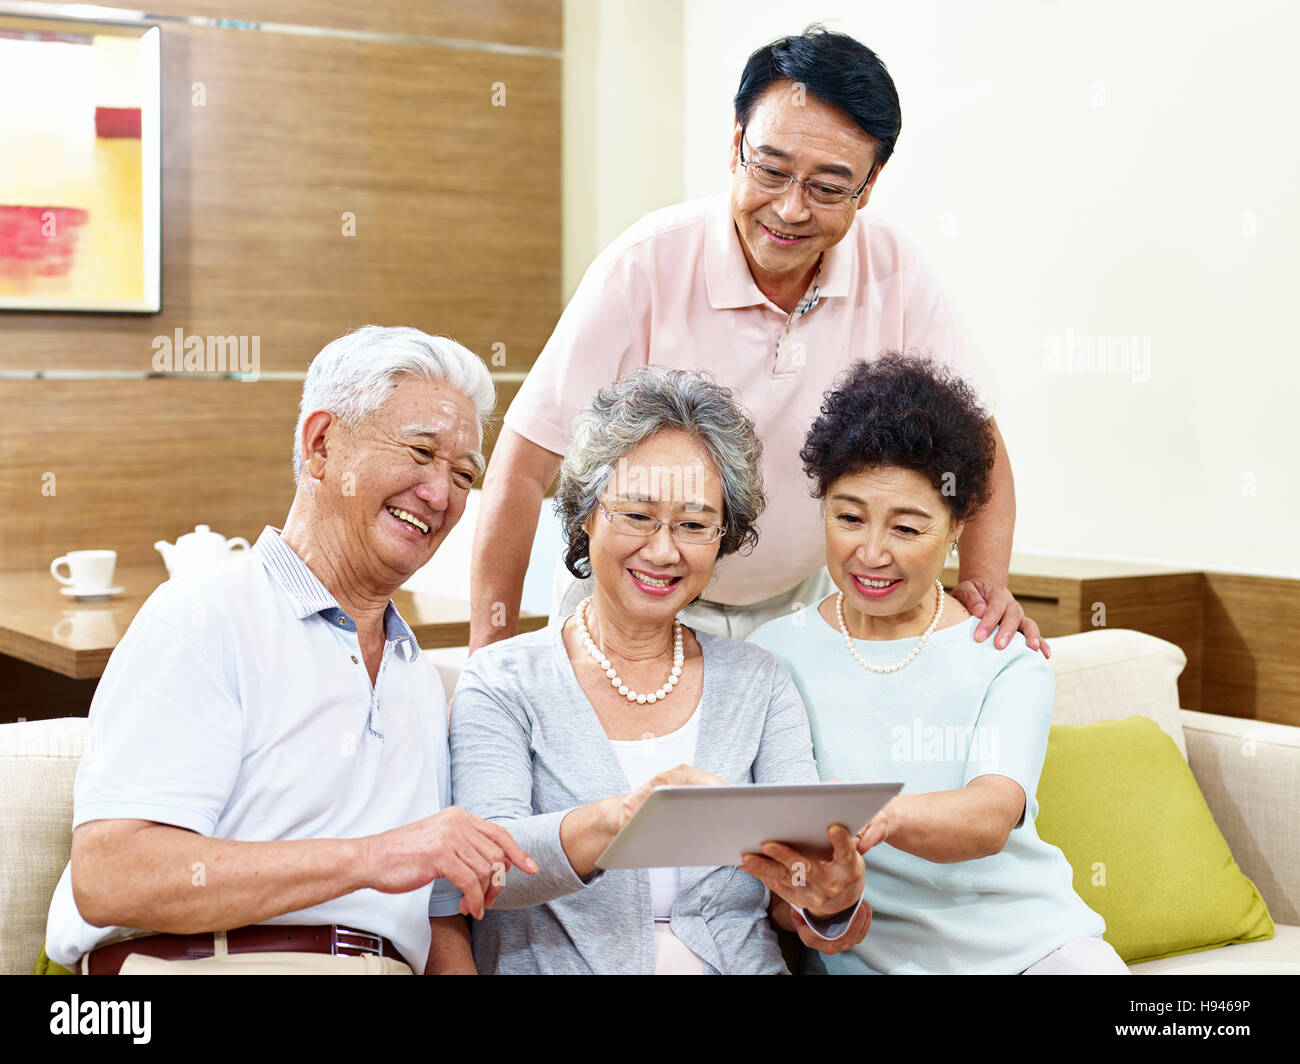 two active senior asian couples looking at tablet computer, happy and smiling Stock Photo